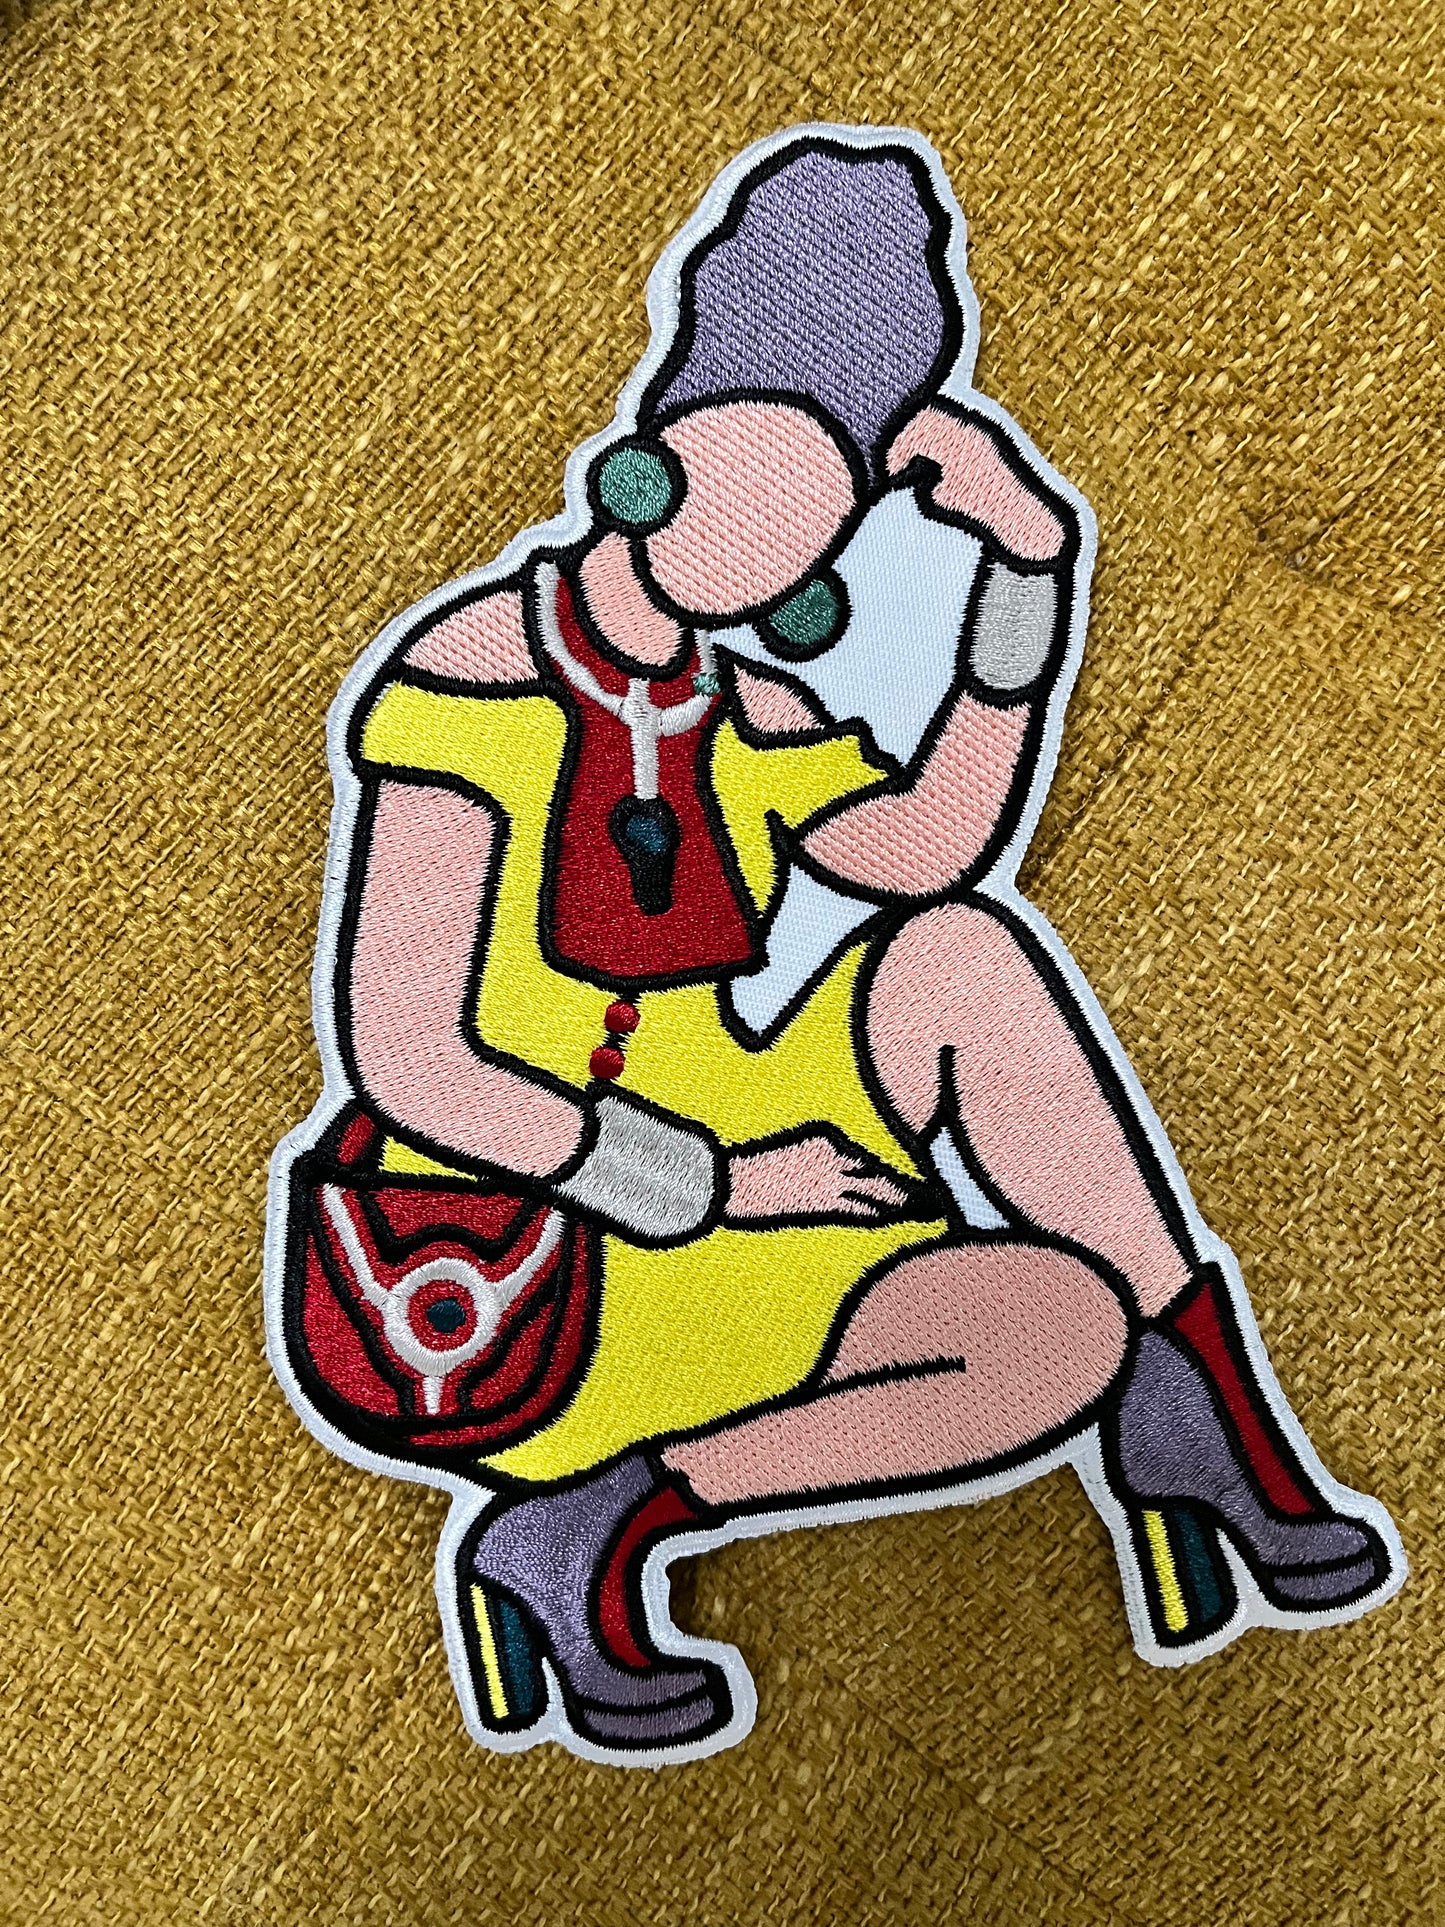 Ngome Queen Patch